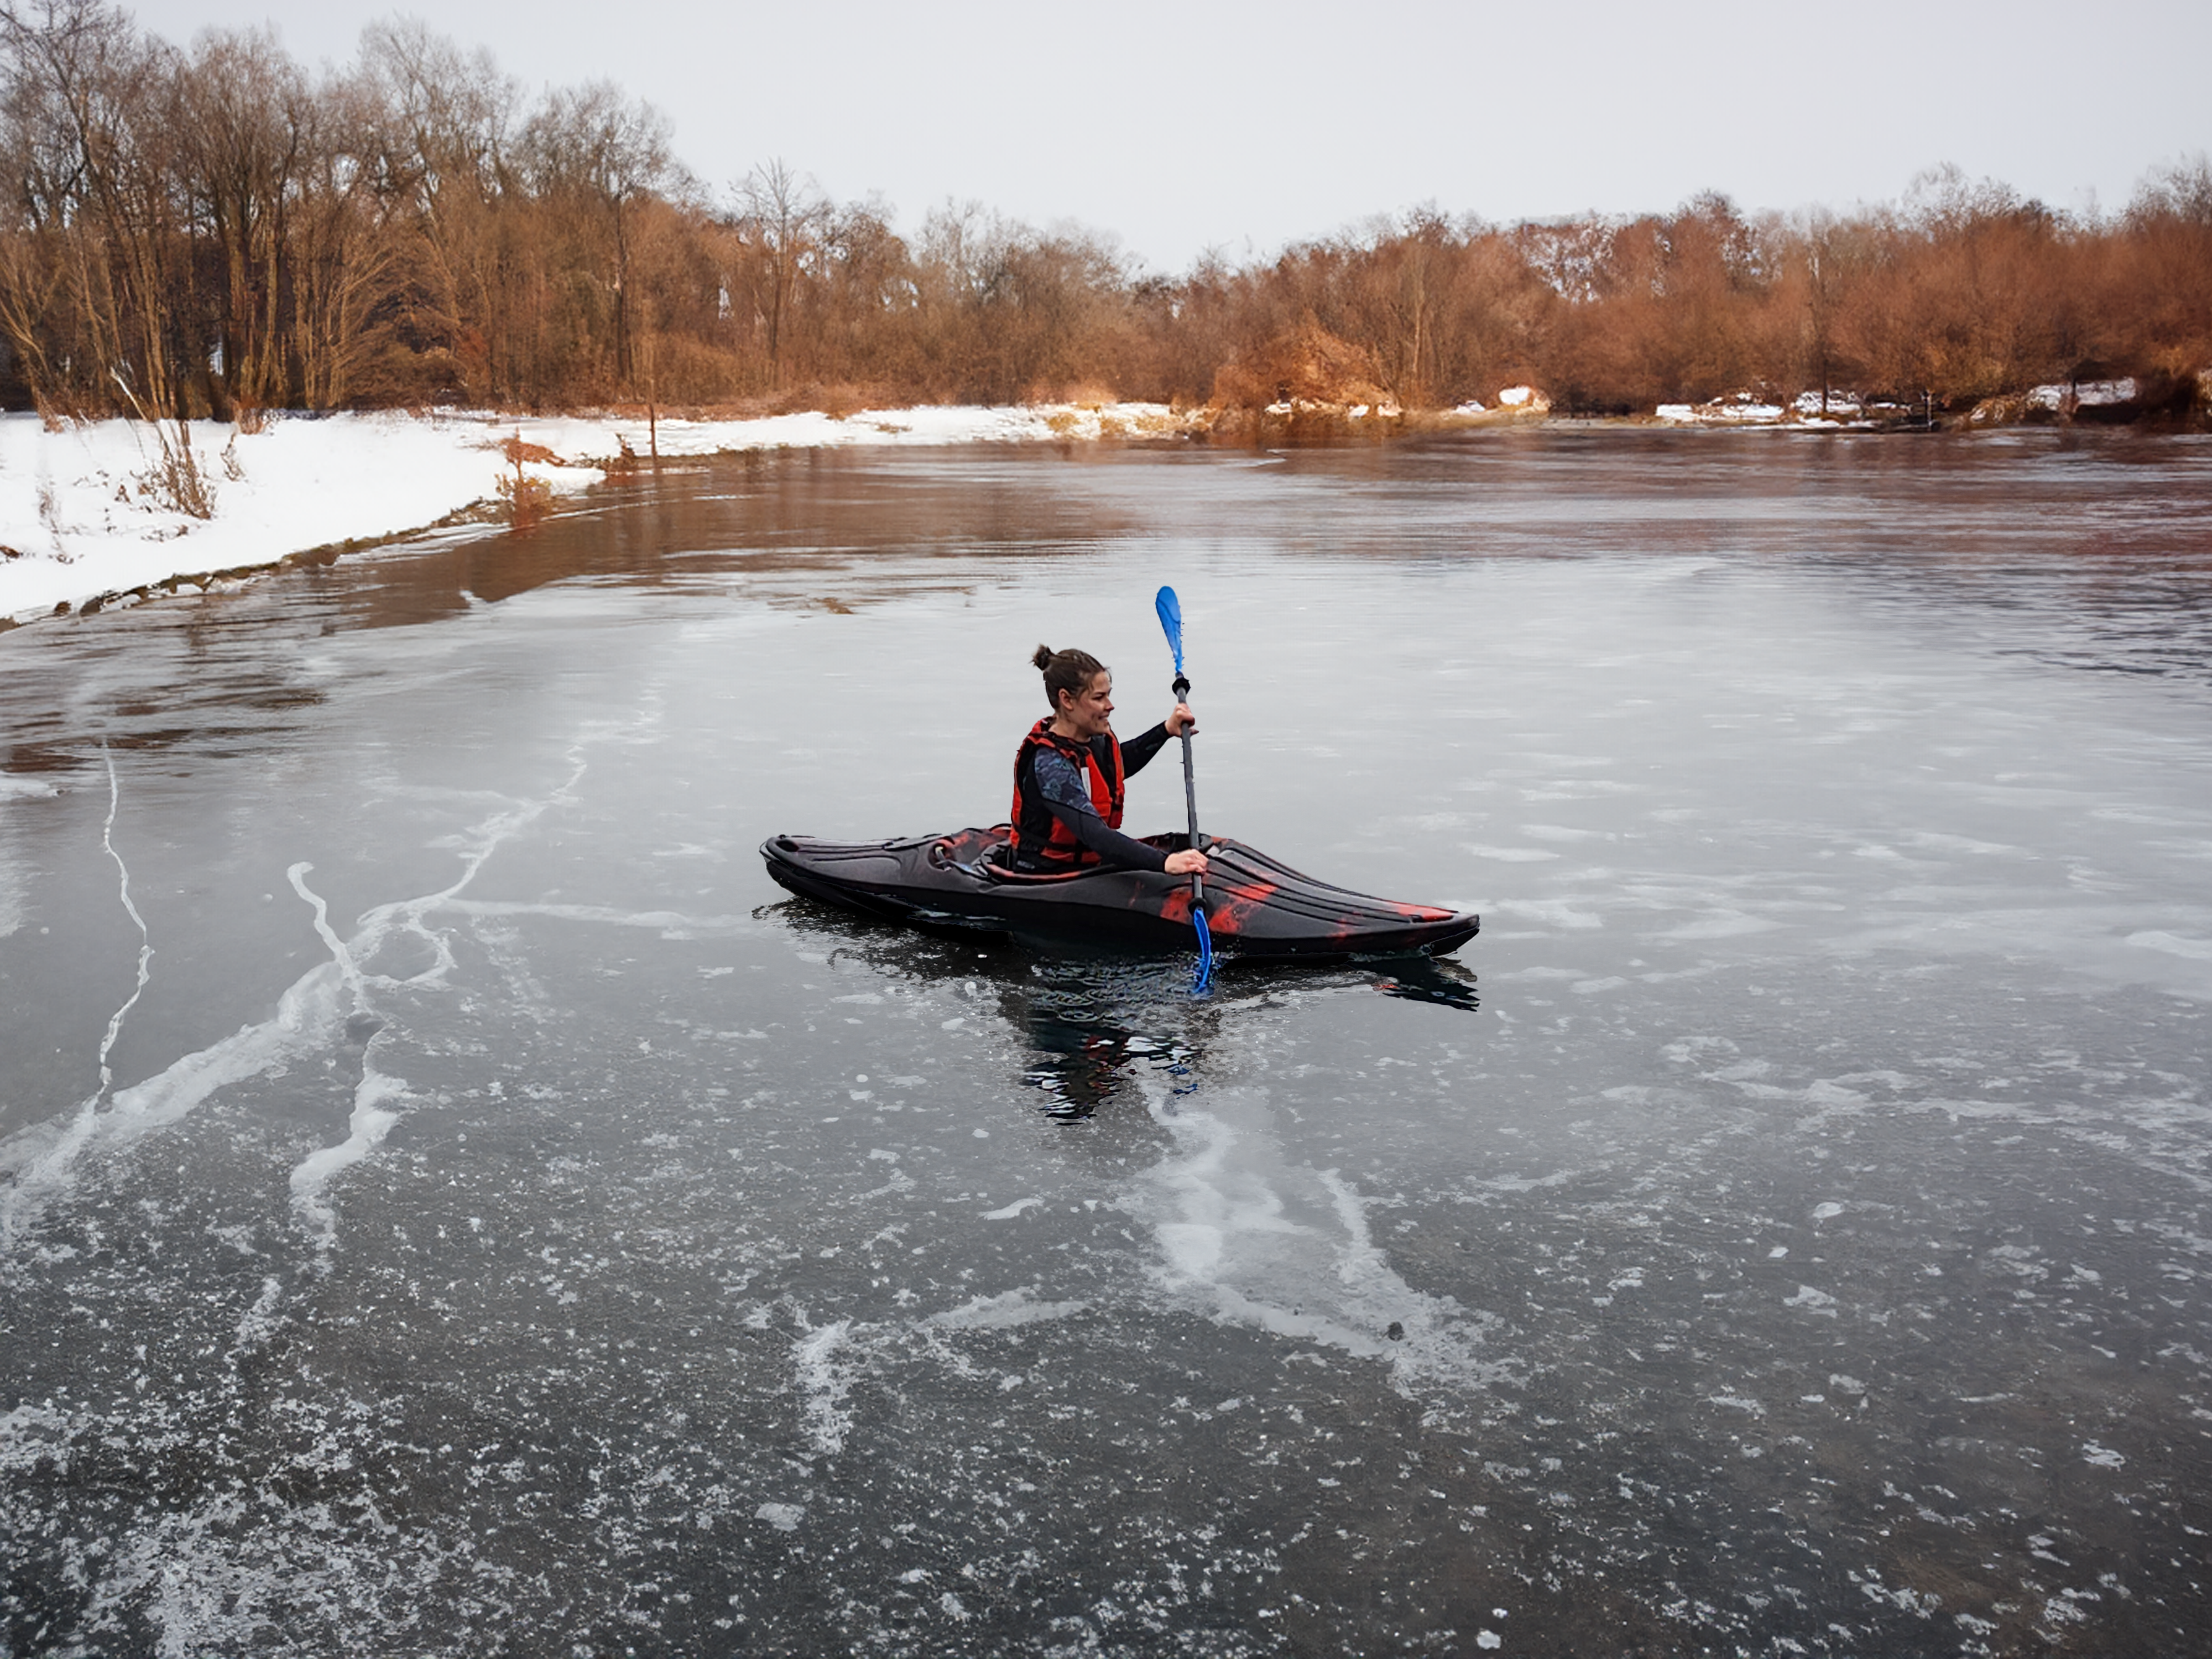 Chasing Thrills: Your Guide to Cold-Weather Water Adventures with Riber